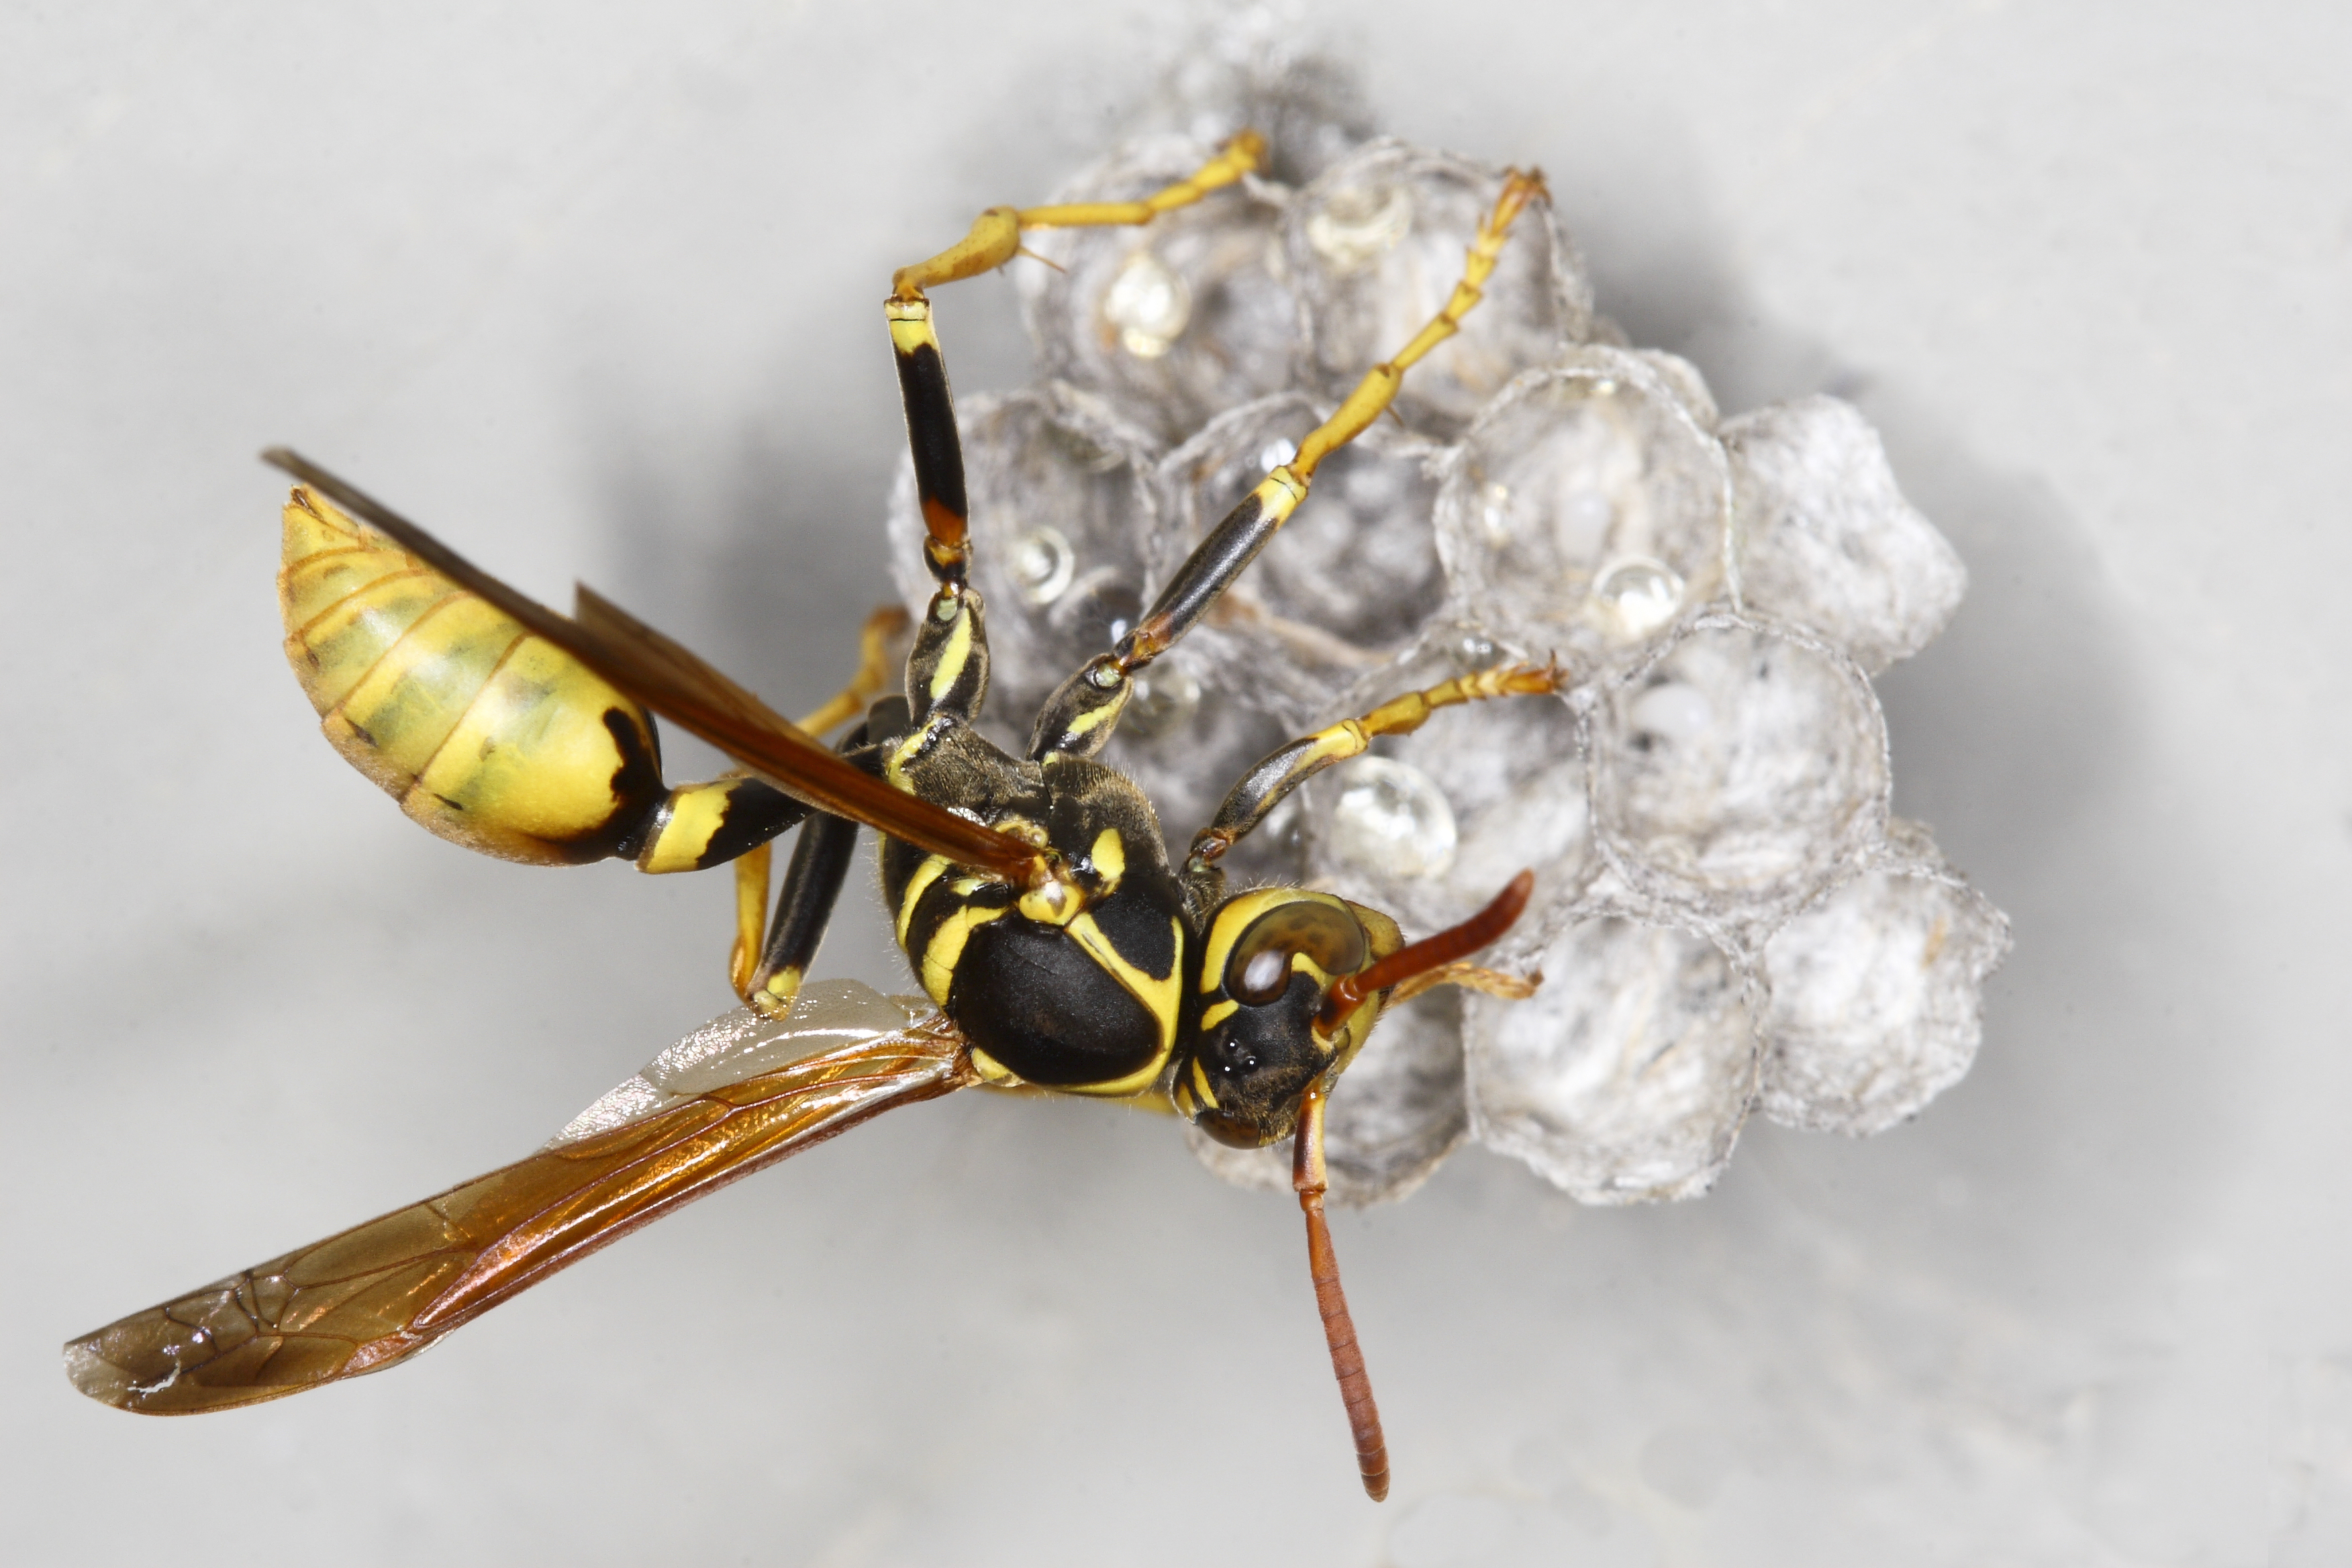 Wasp building nest